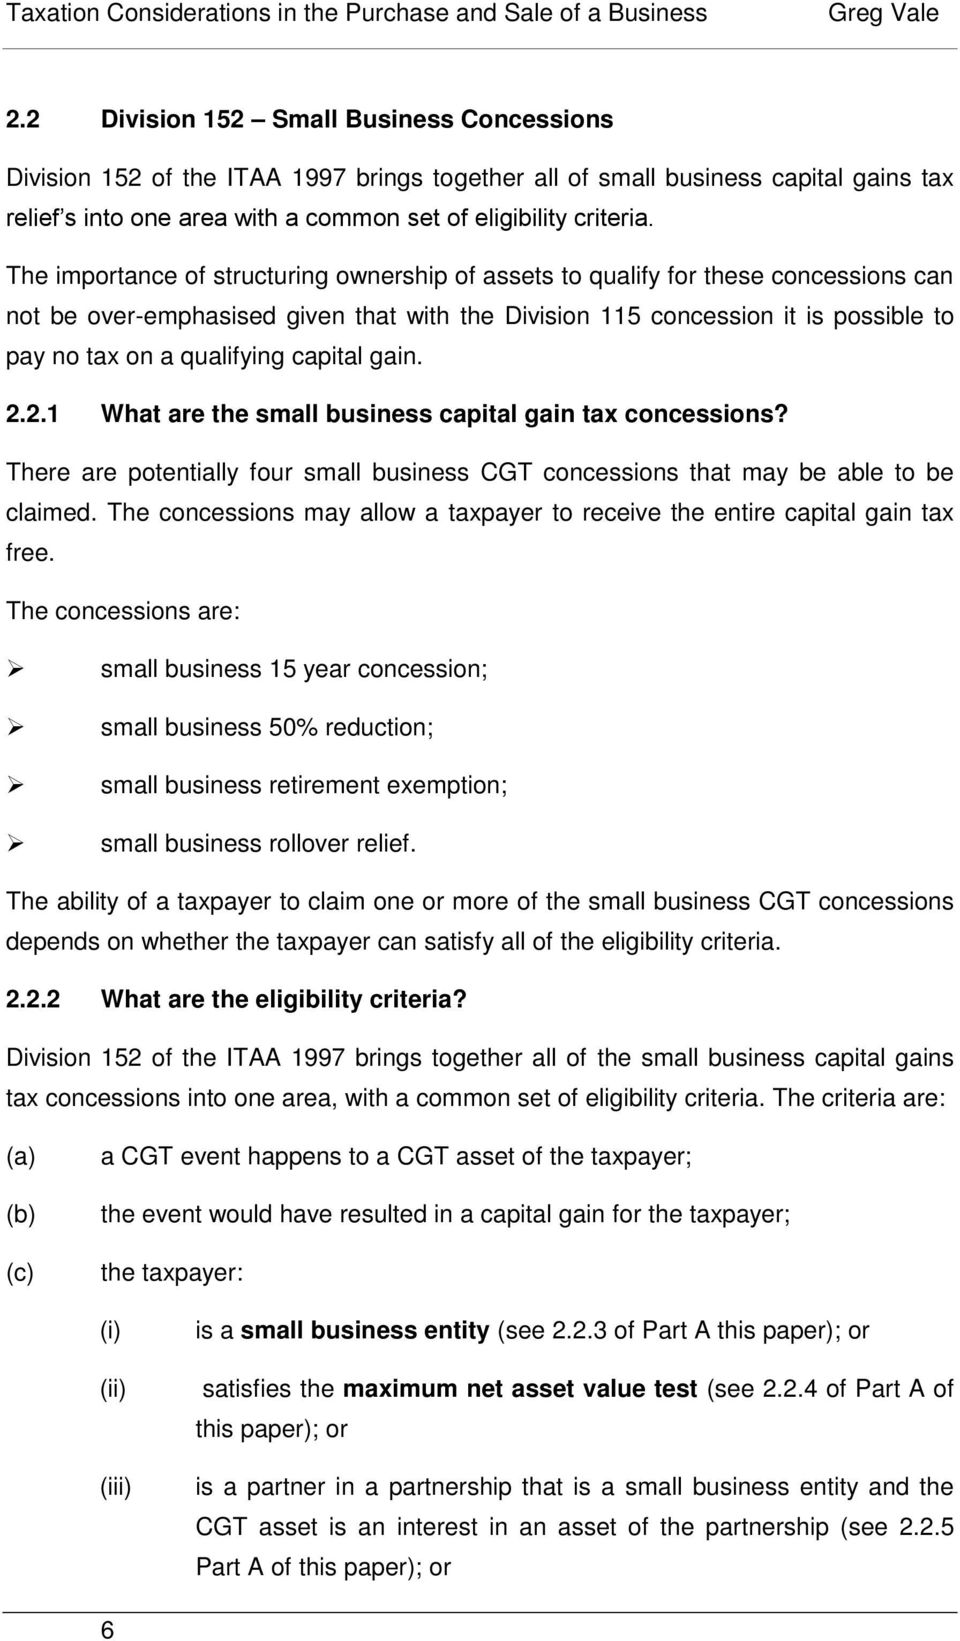 capital gain. 2.2.1 What are the small business capital gain tax concessions? There are potentially four small business CGT concessions that may be able to be claimed.